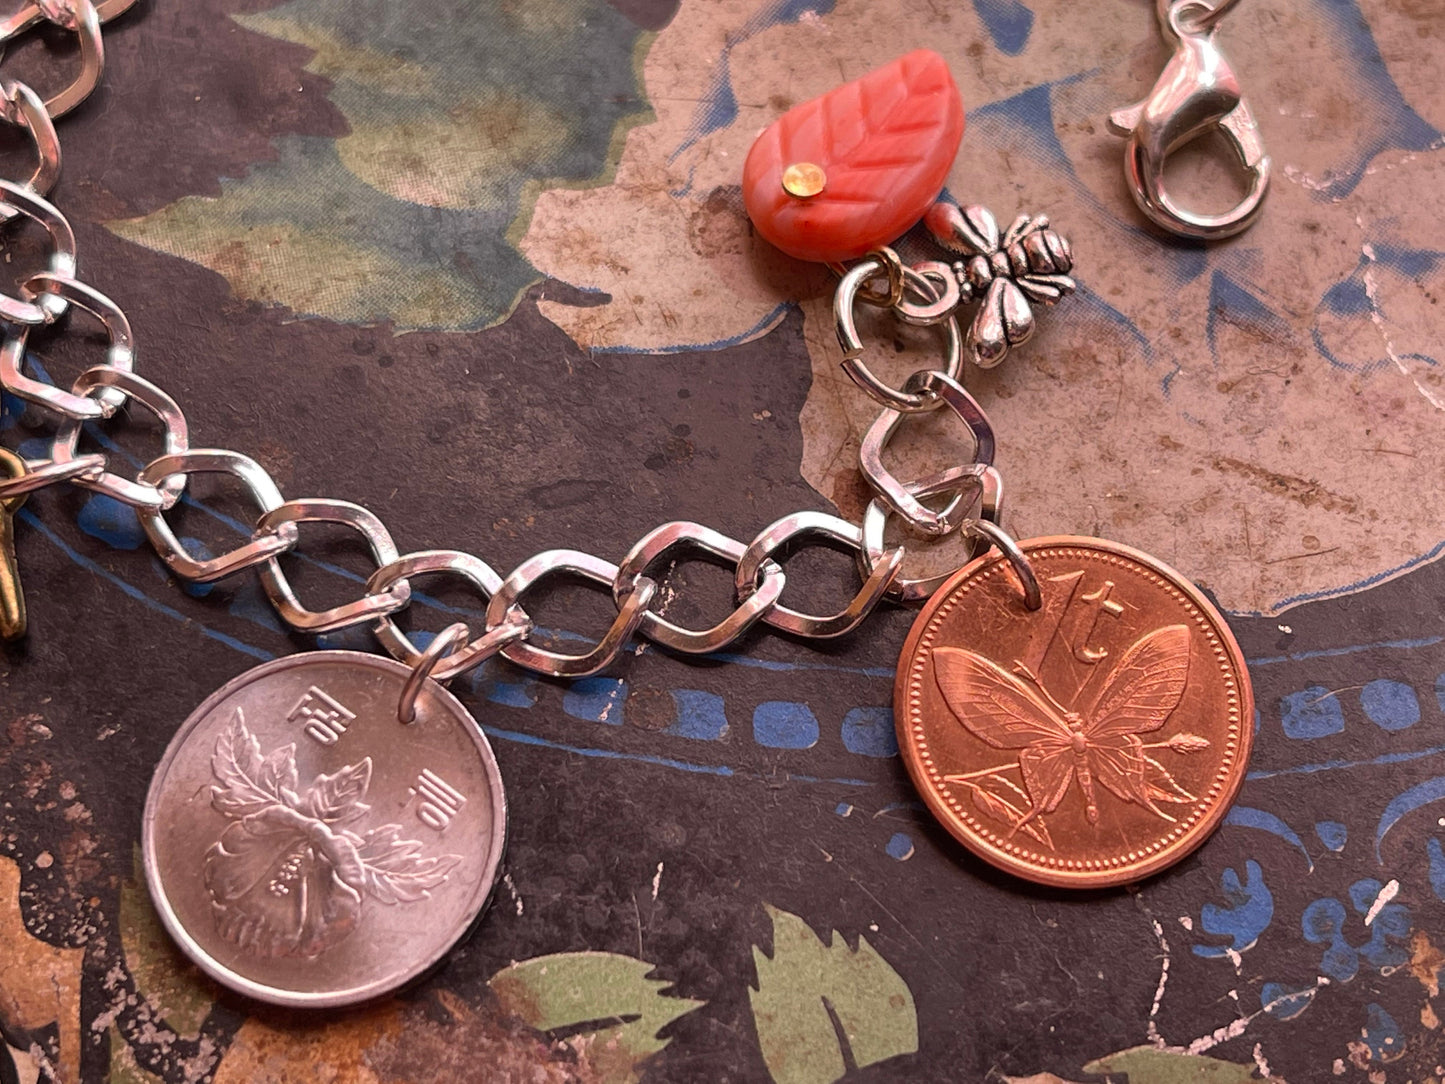 Coin Charm silver designer bracelet - Mothers Day - garden bee orchid rose hummingbird heart - hand-blown glass - adjustable w lobster clasp